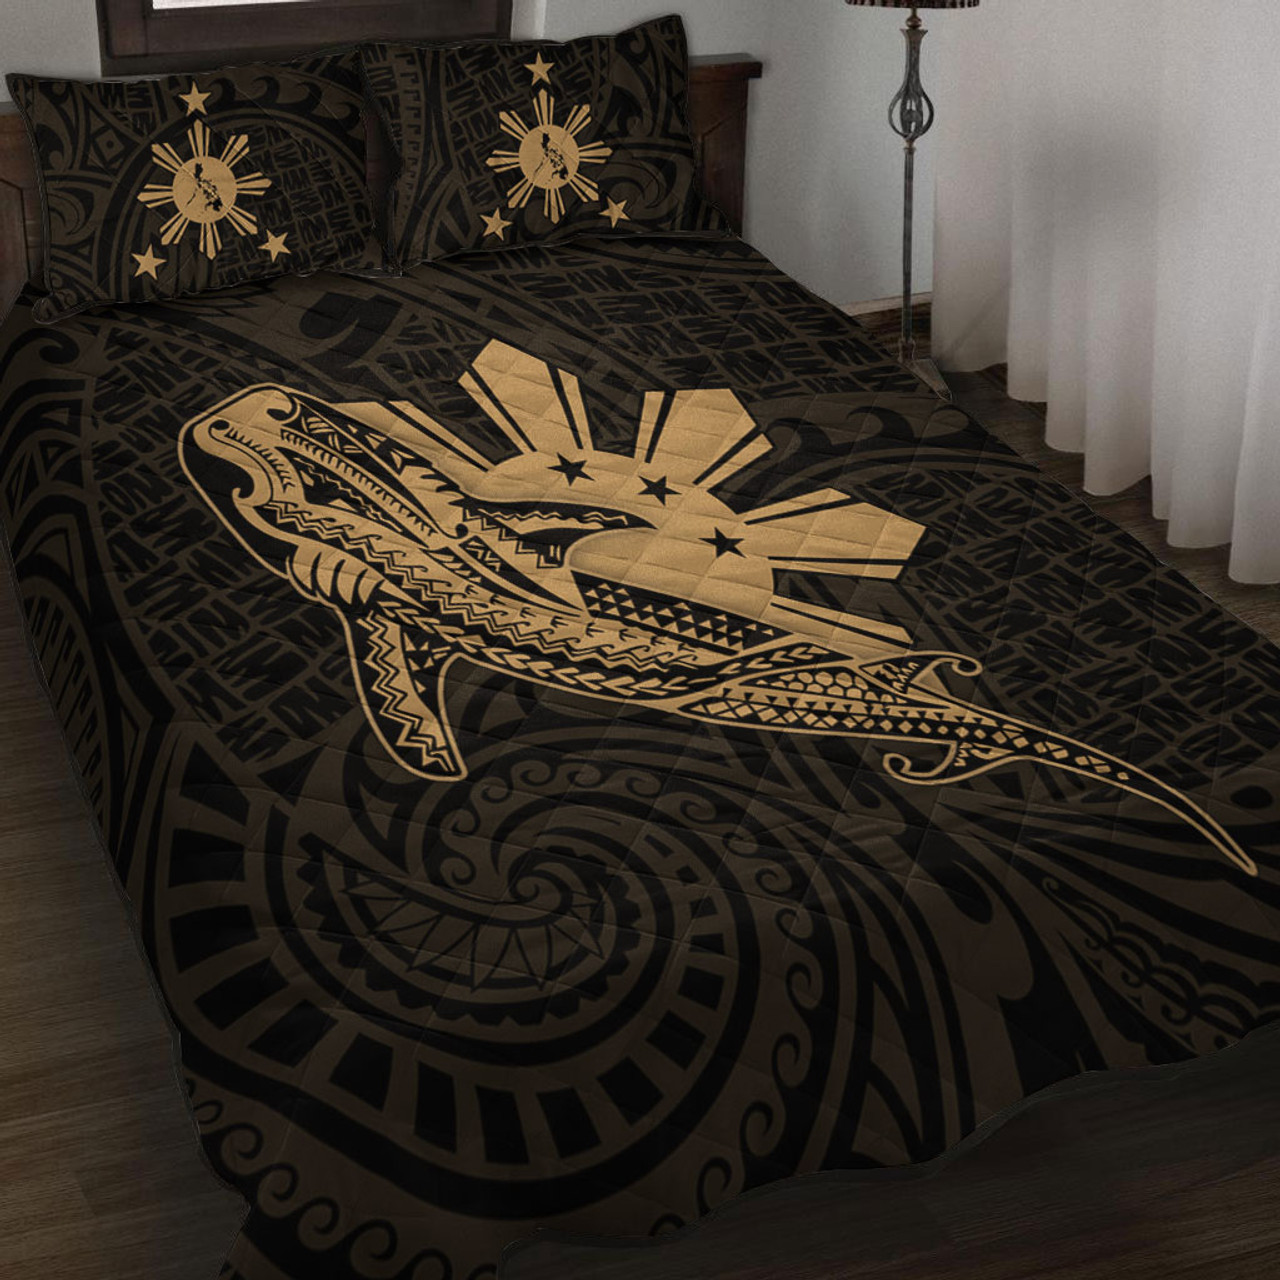 Philippines Filipinos Quilt Bed Set Tribal Whale Shark